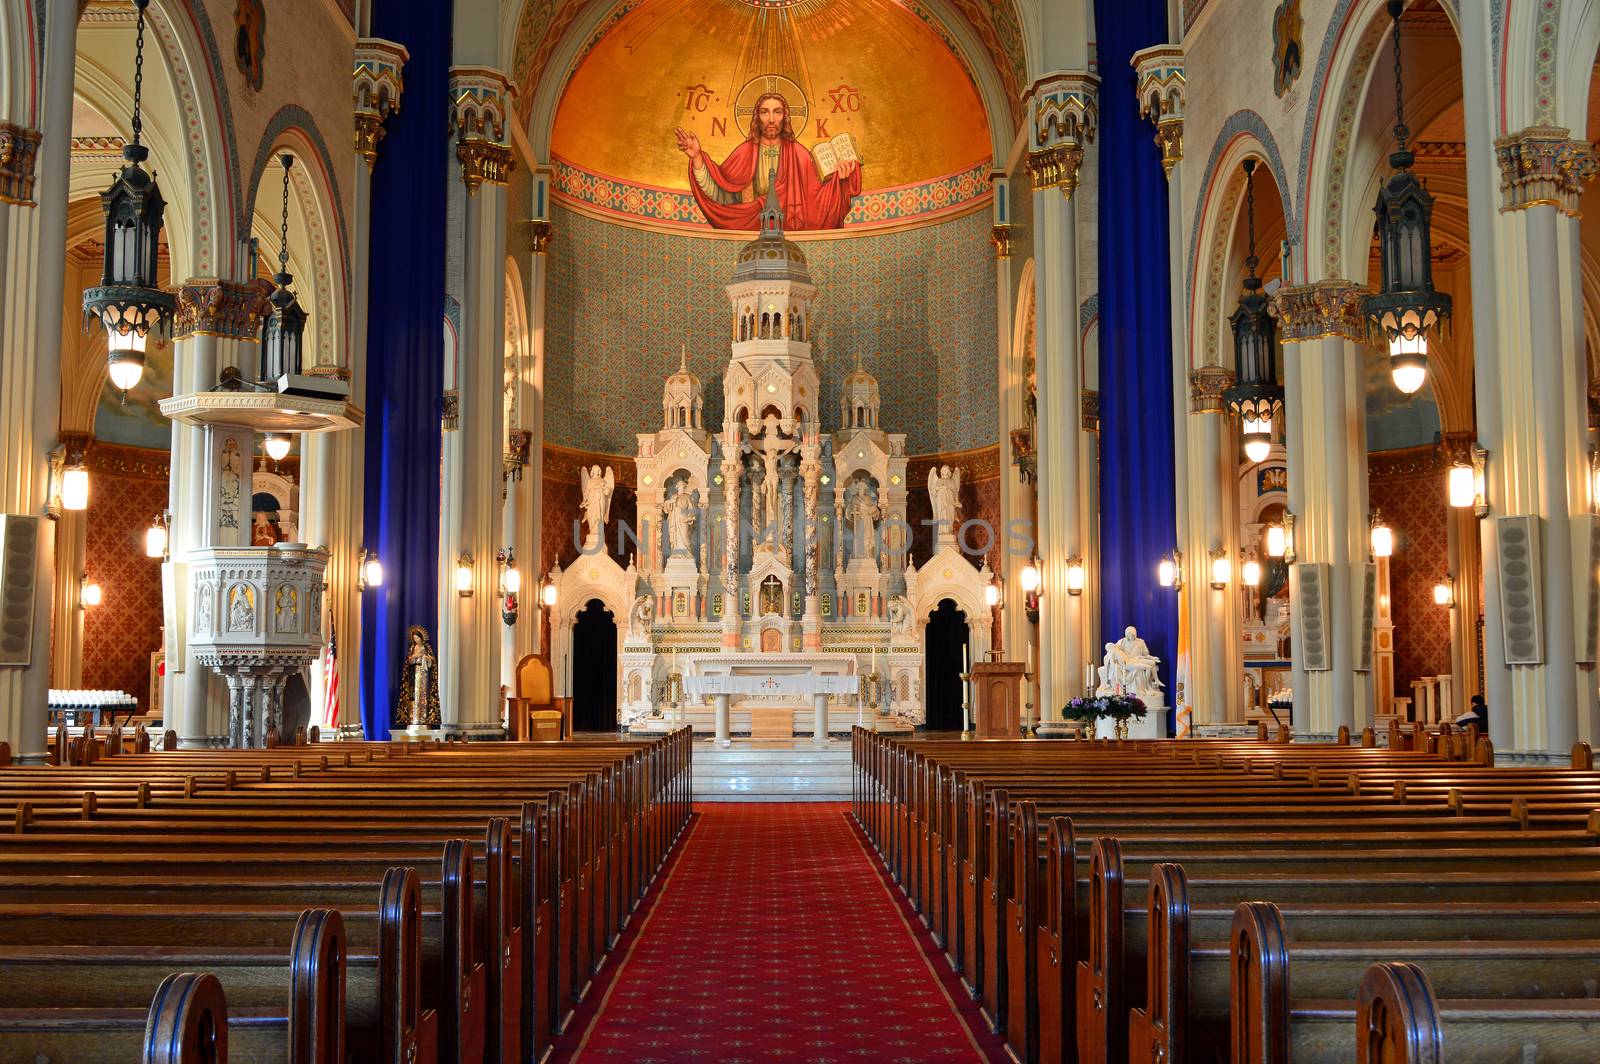 Interior of Sts Peter and Paul Church, San Francisco